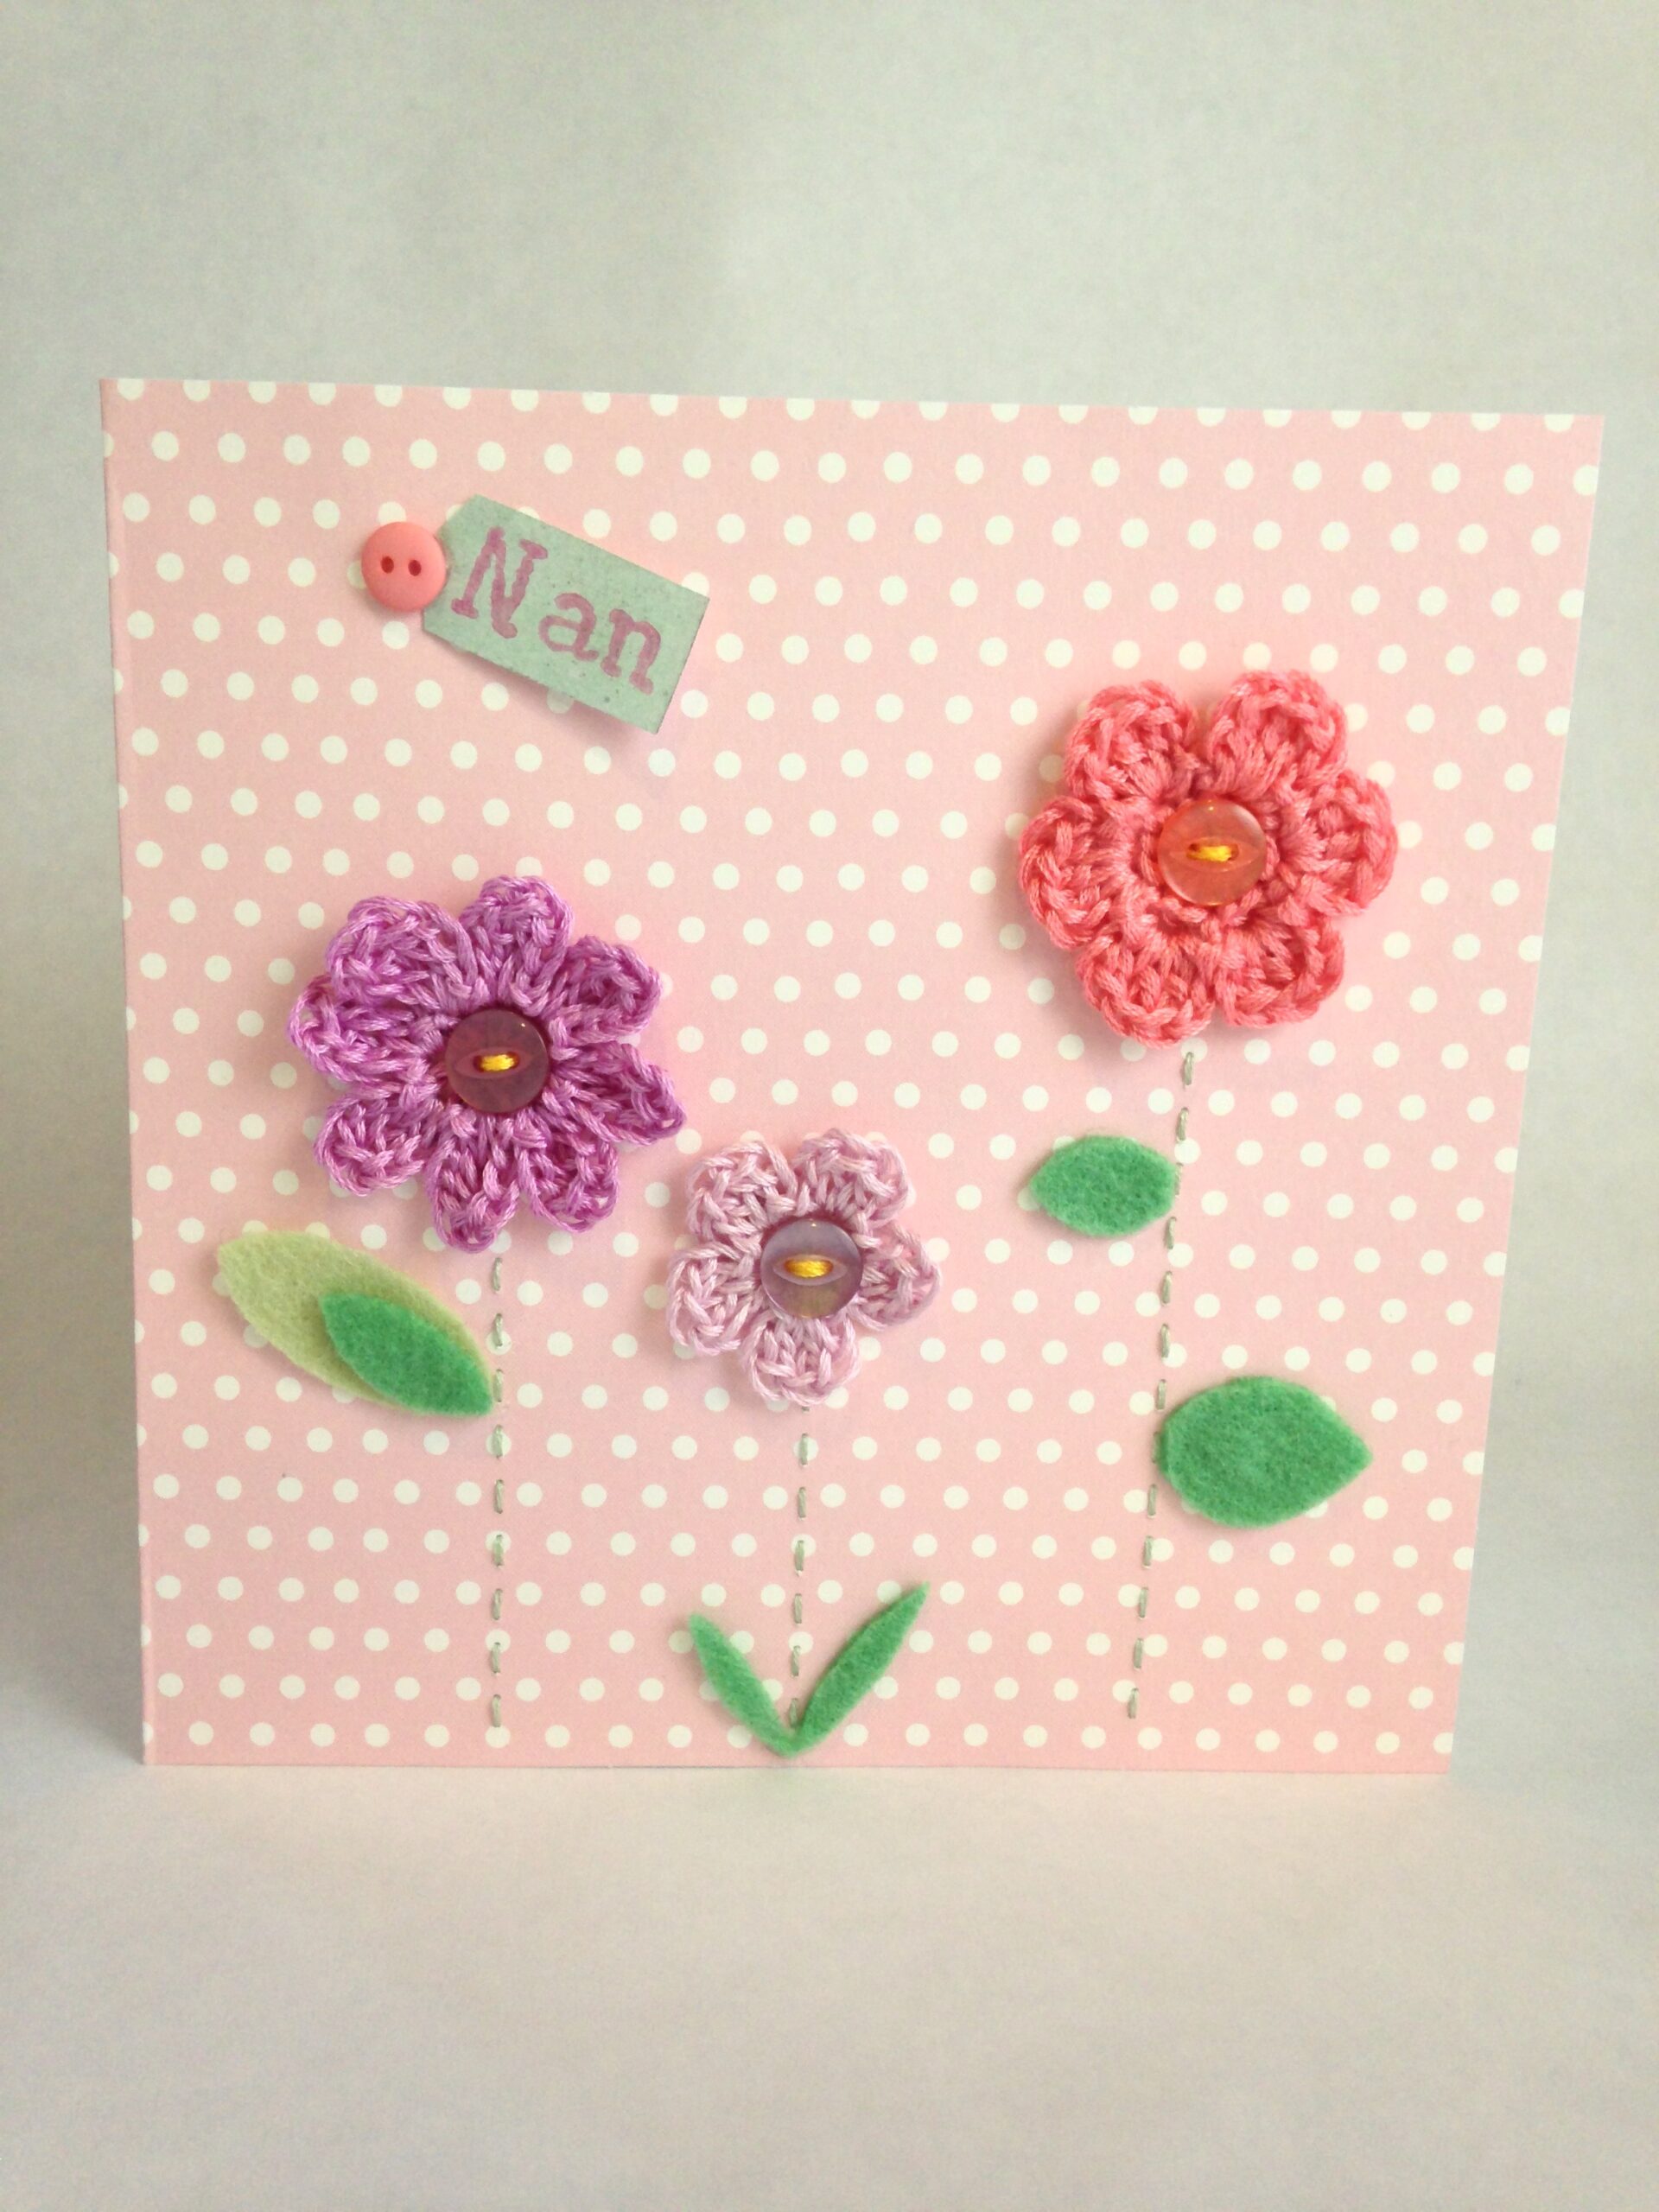 Hand crocheted and hand stitched greetings card.